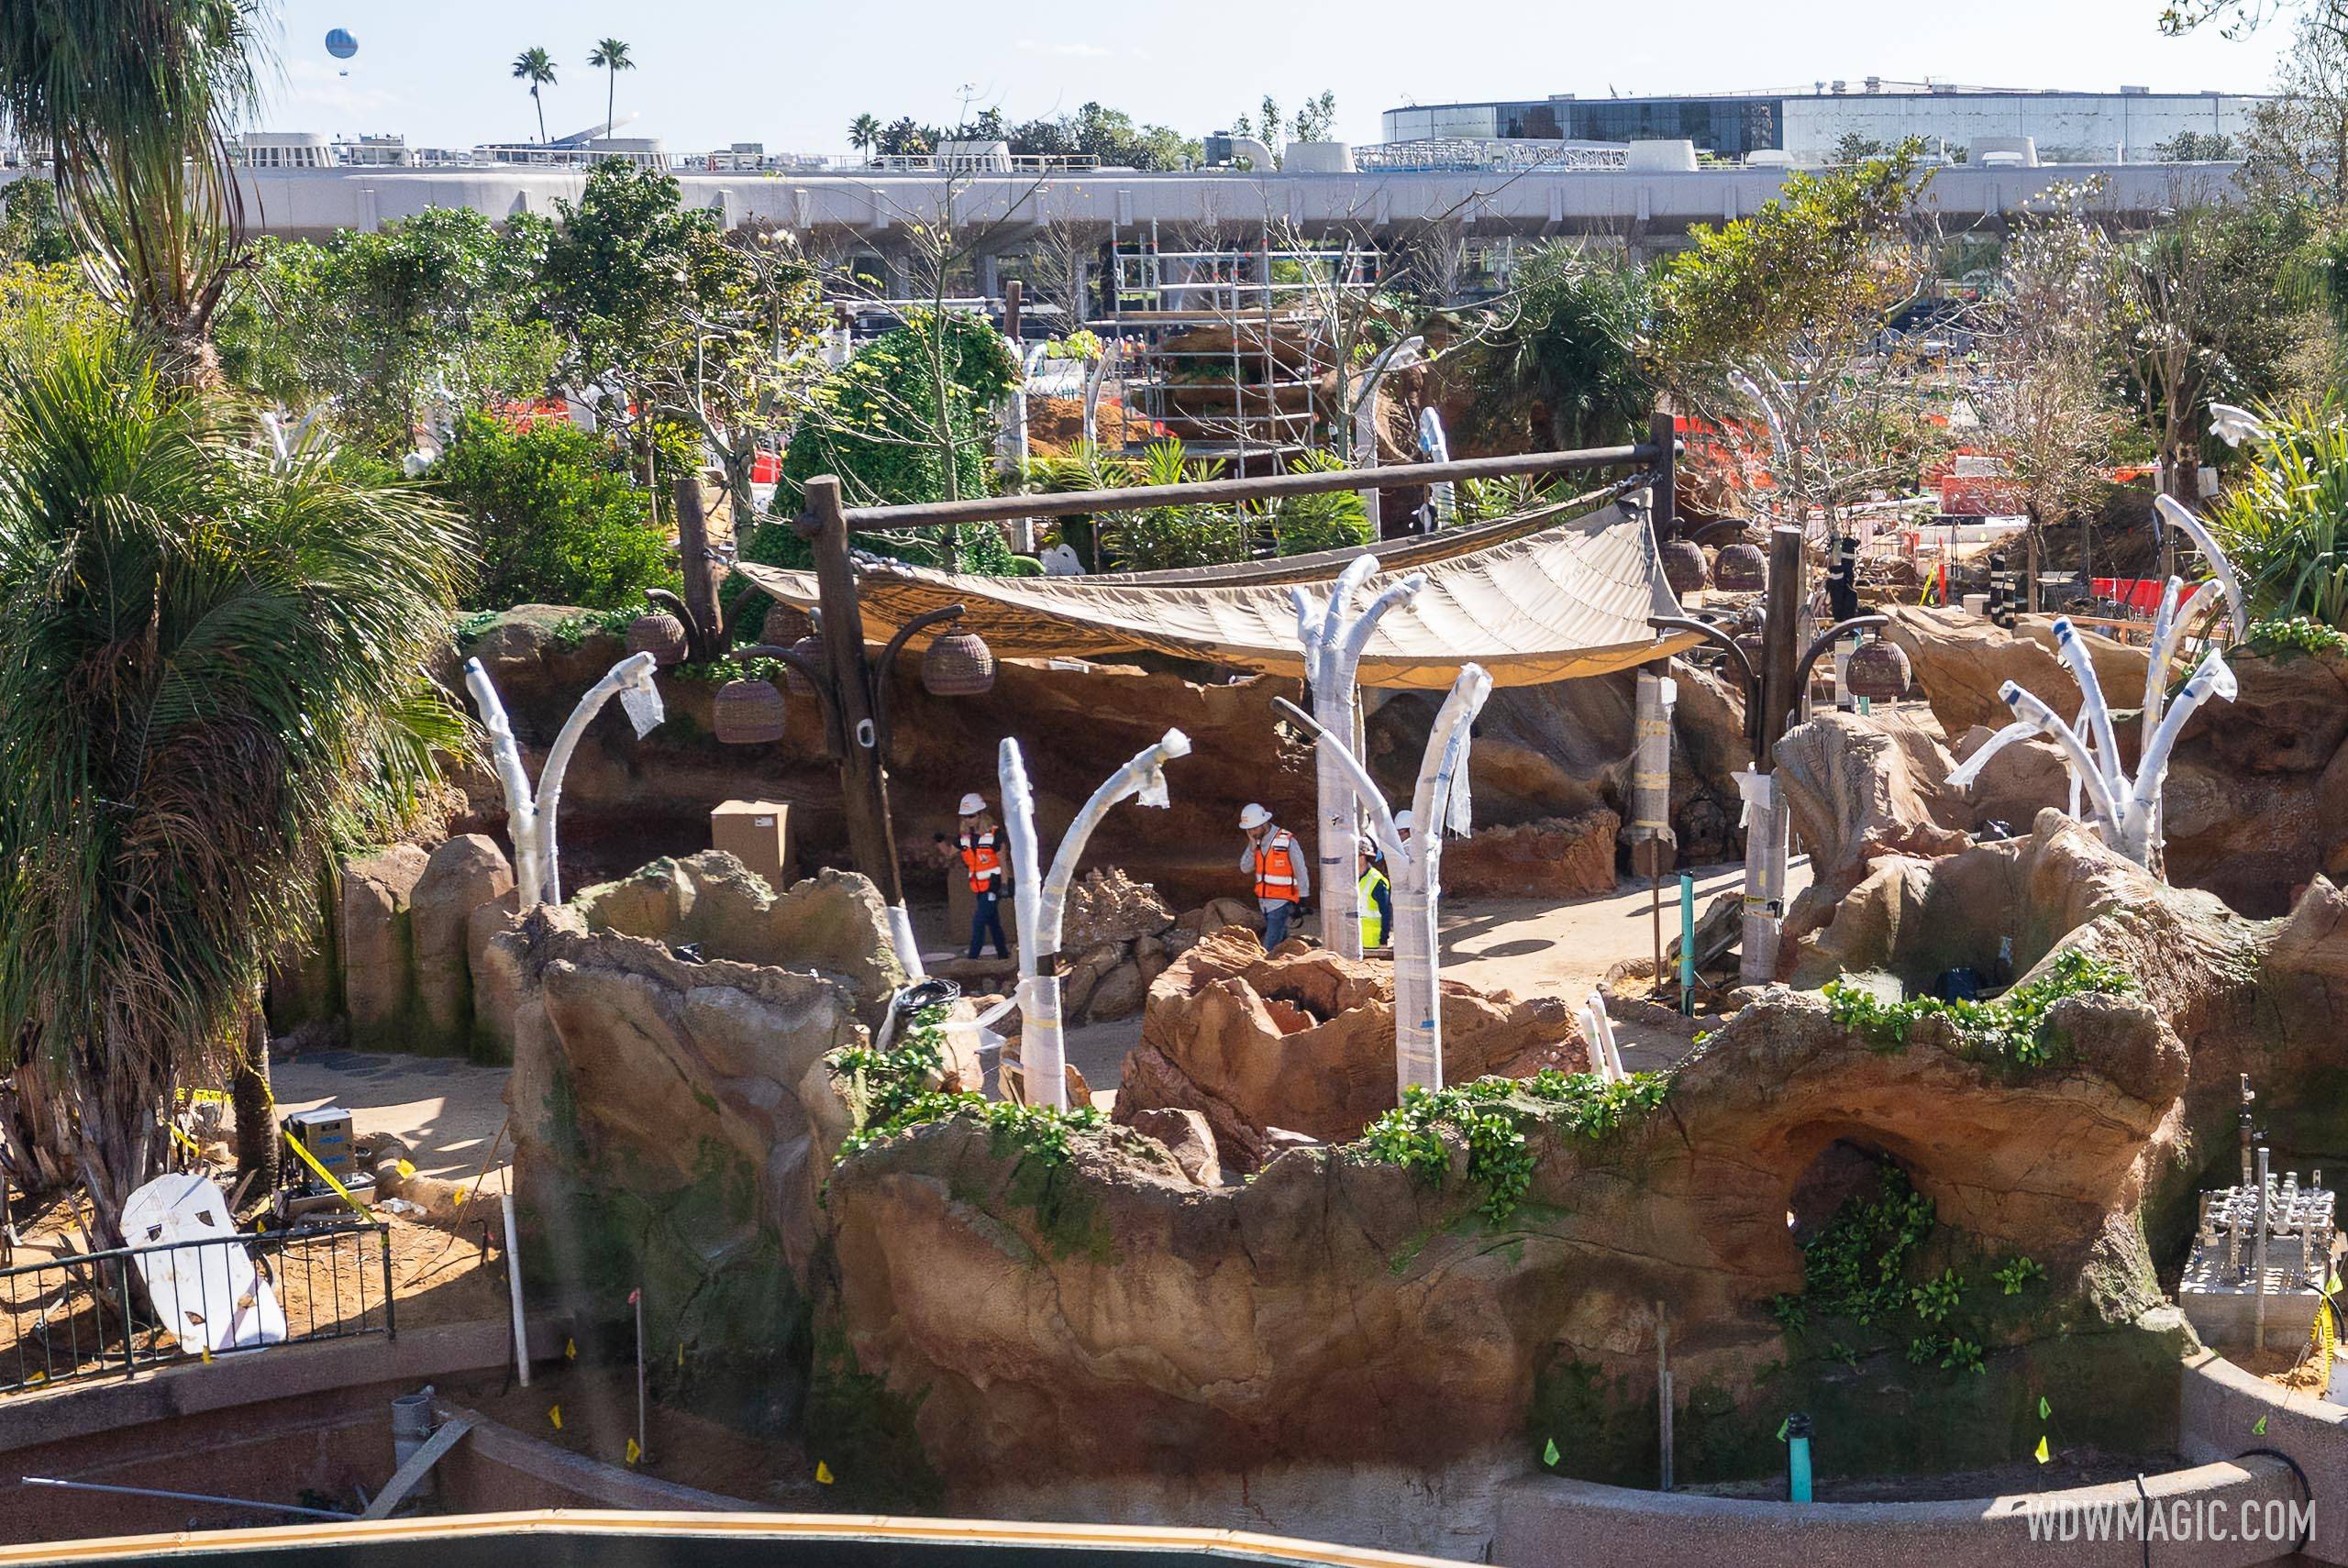 Construction update from 'Journey of Water Inspired by Moana' at EPCOT